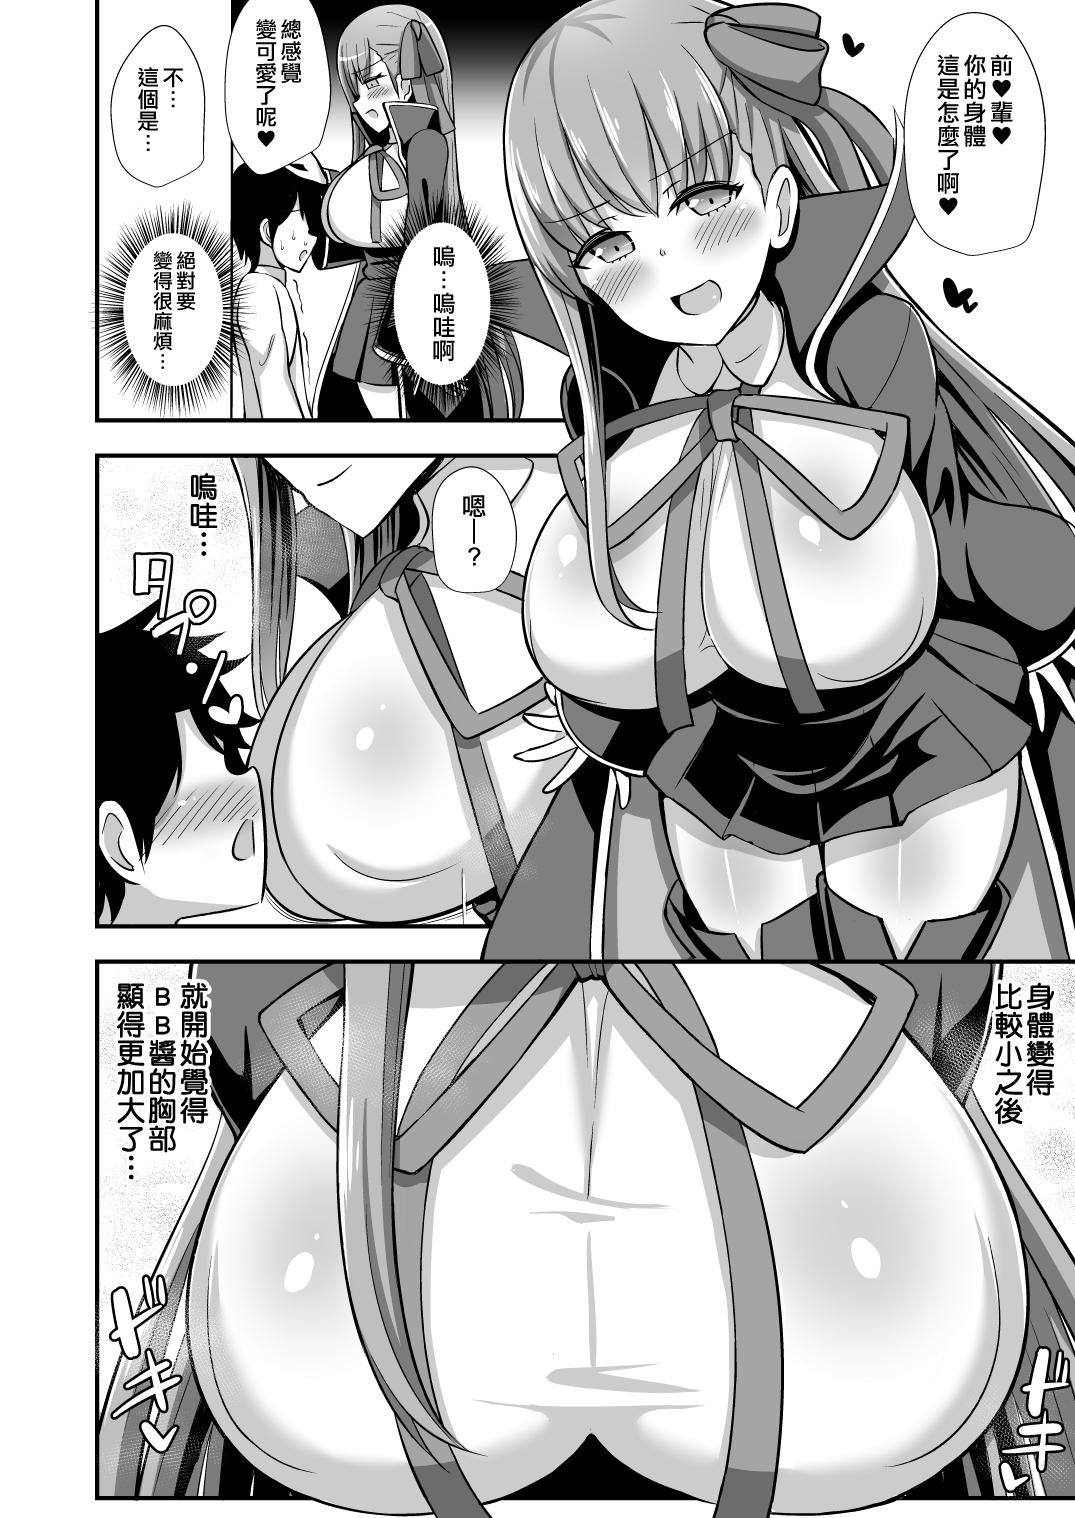 Assfucked BB Onee-chan to Oshasei Time - Fate grand order Sex Massage - Page 3